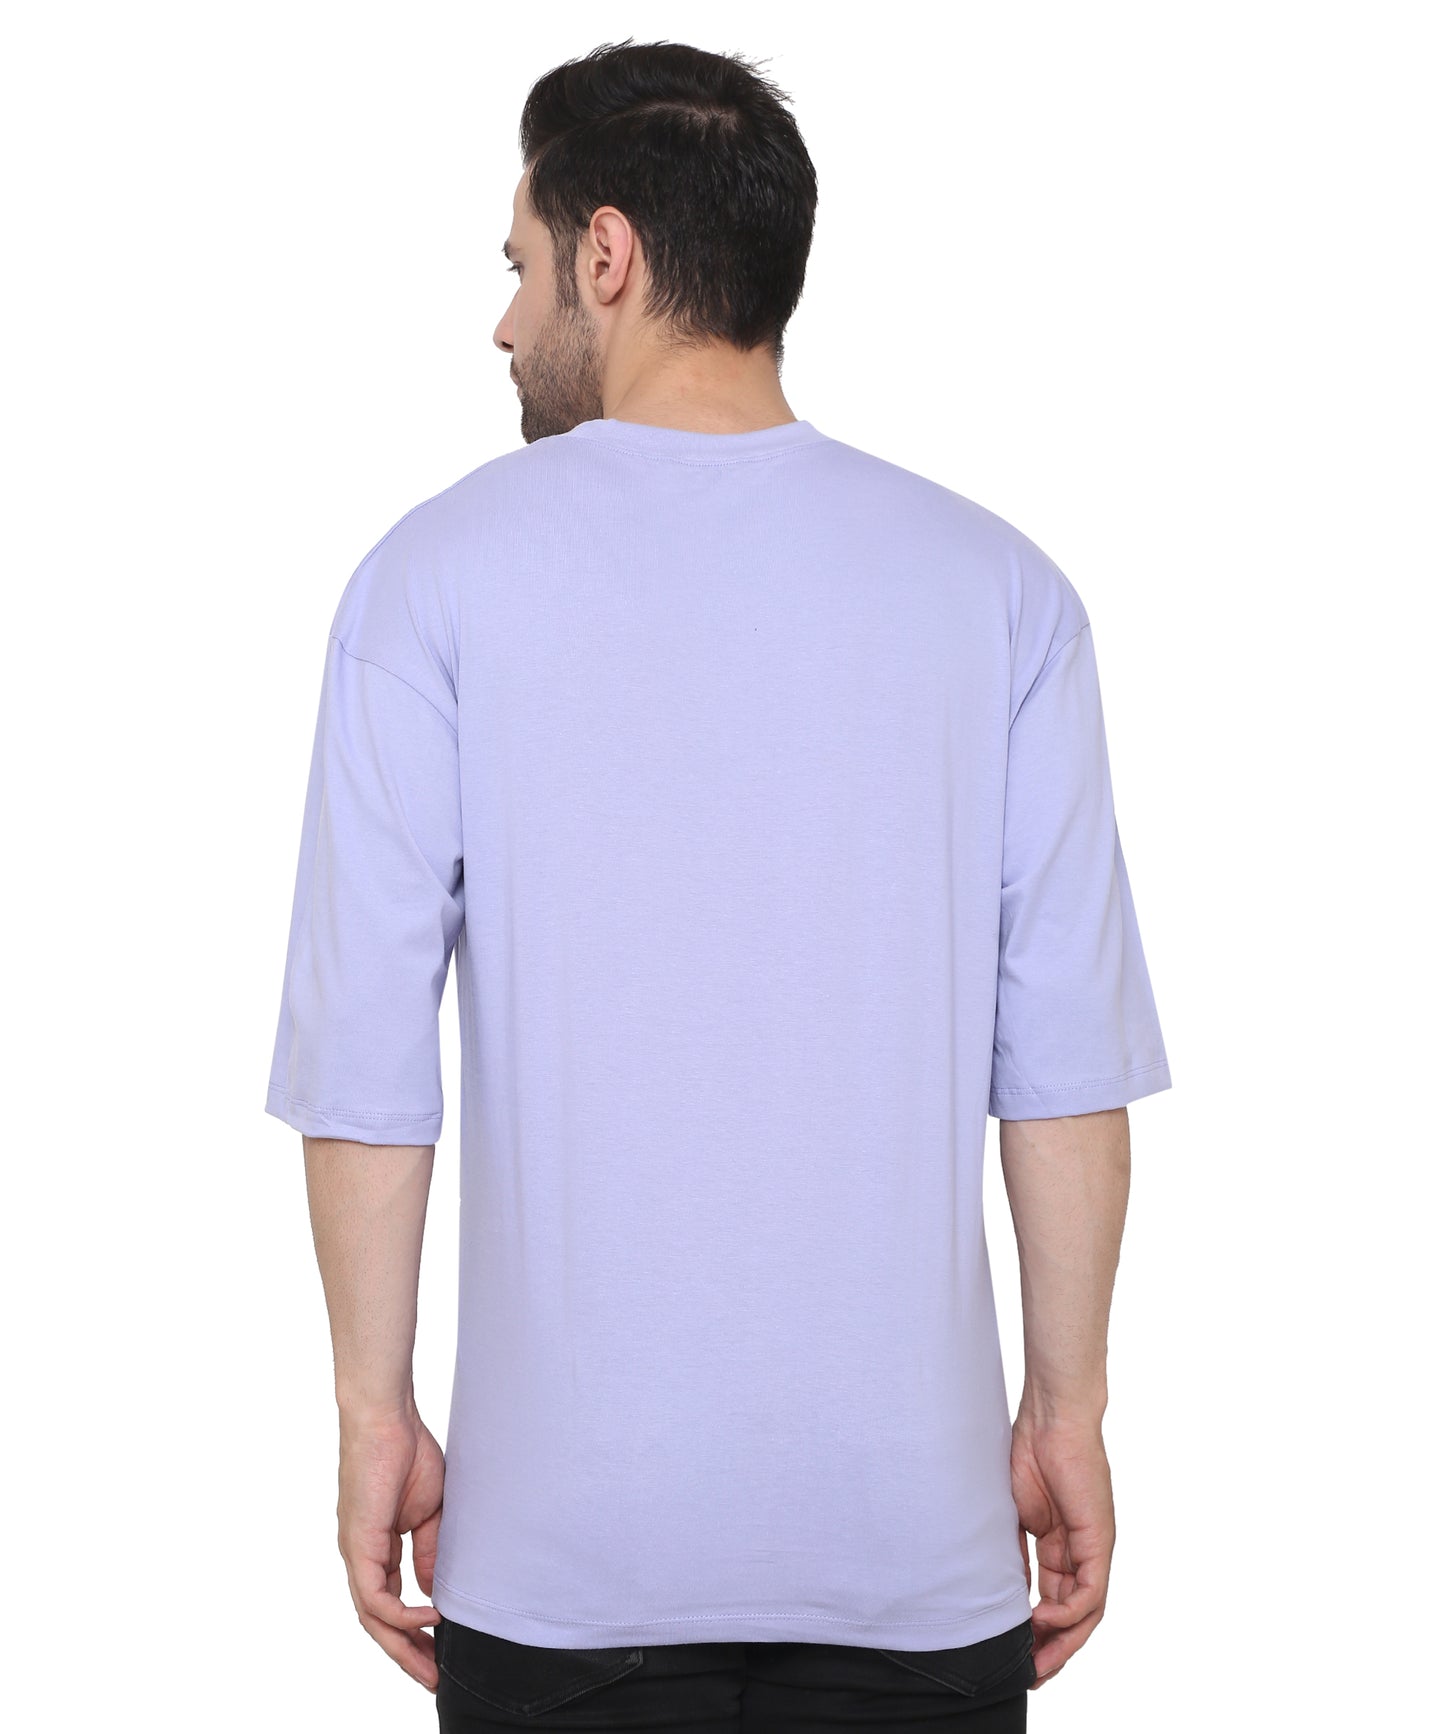 Light Lavender Oversized Cotton T-shirts Relaxed Fit Tees for Men